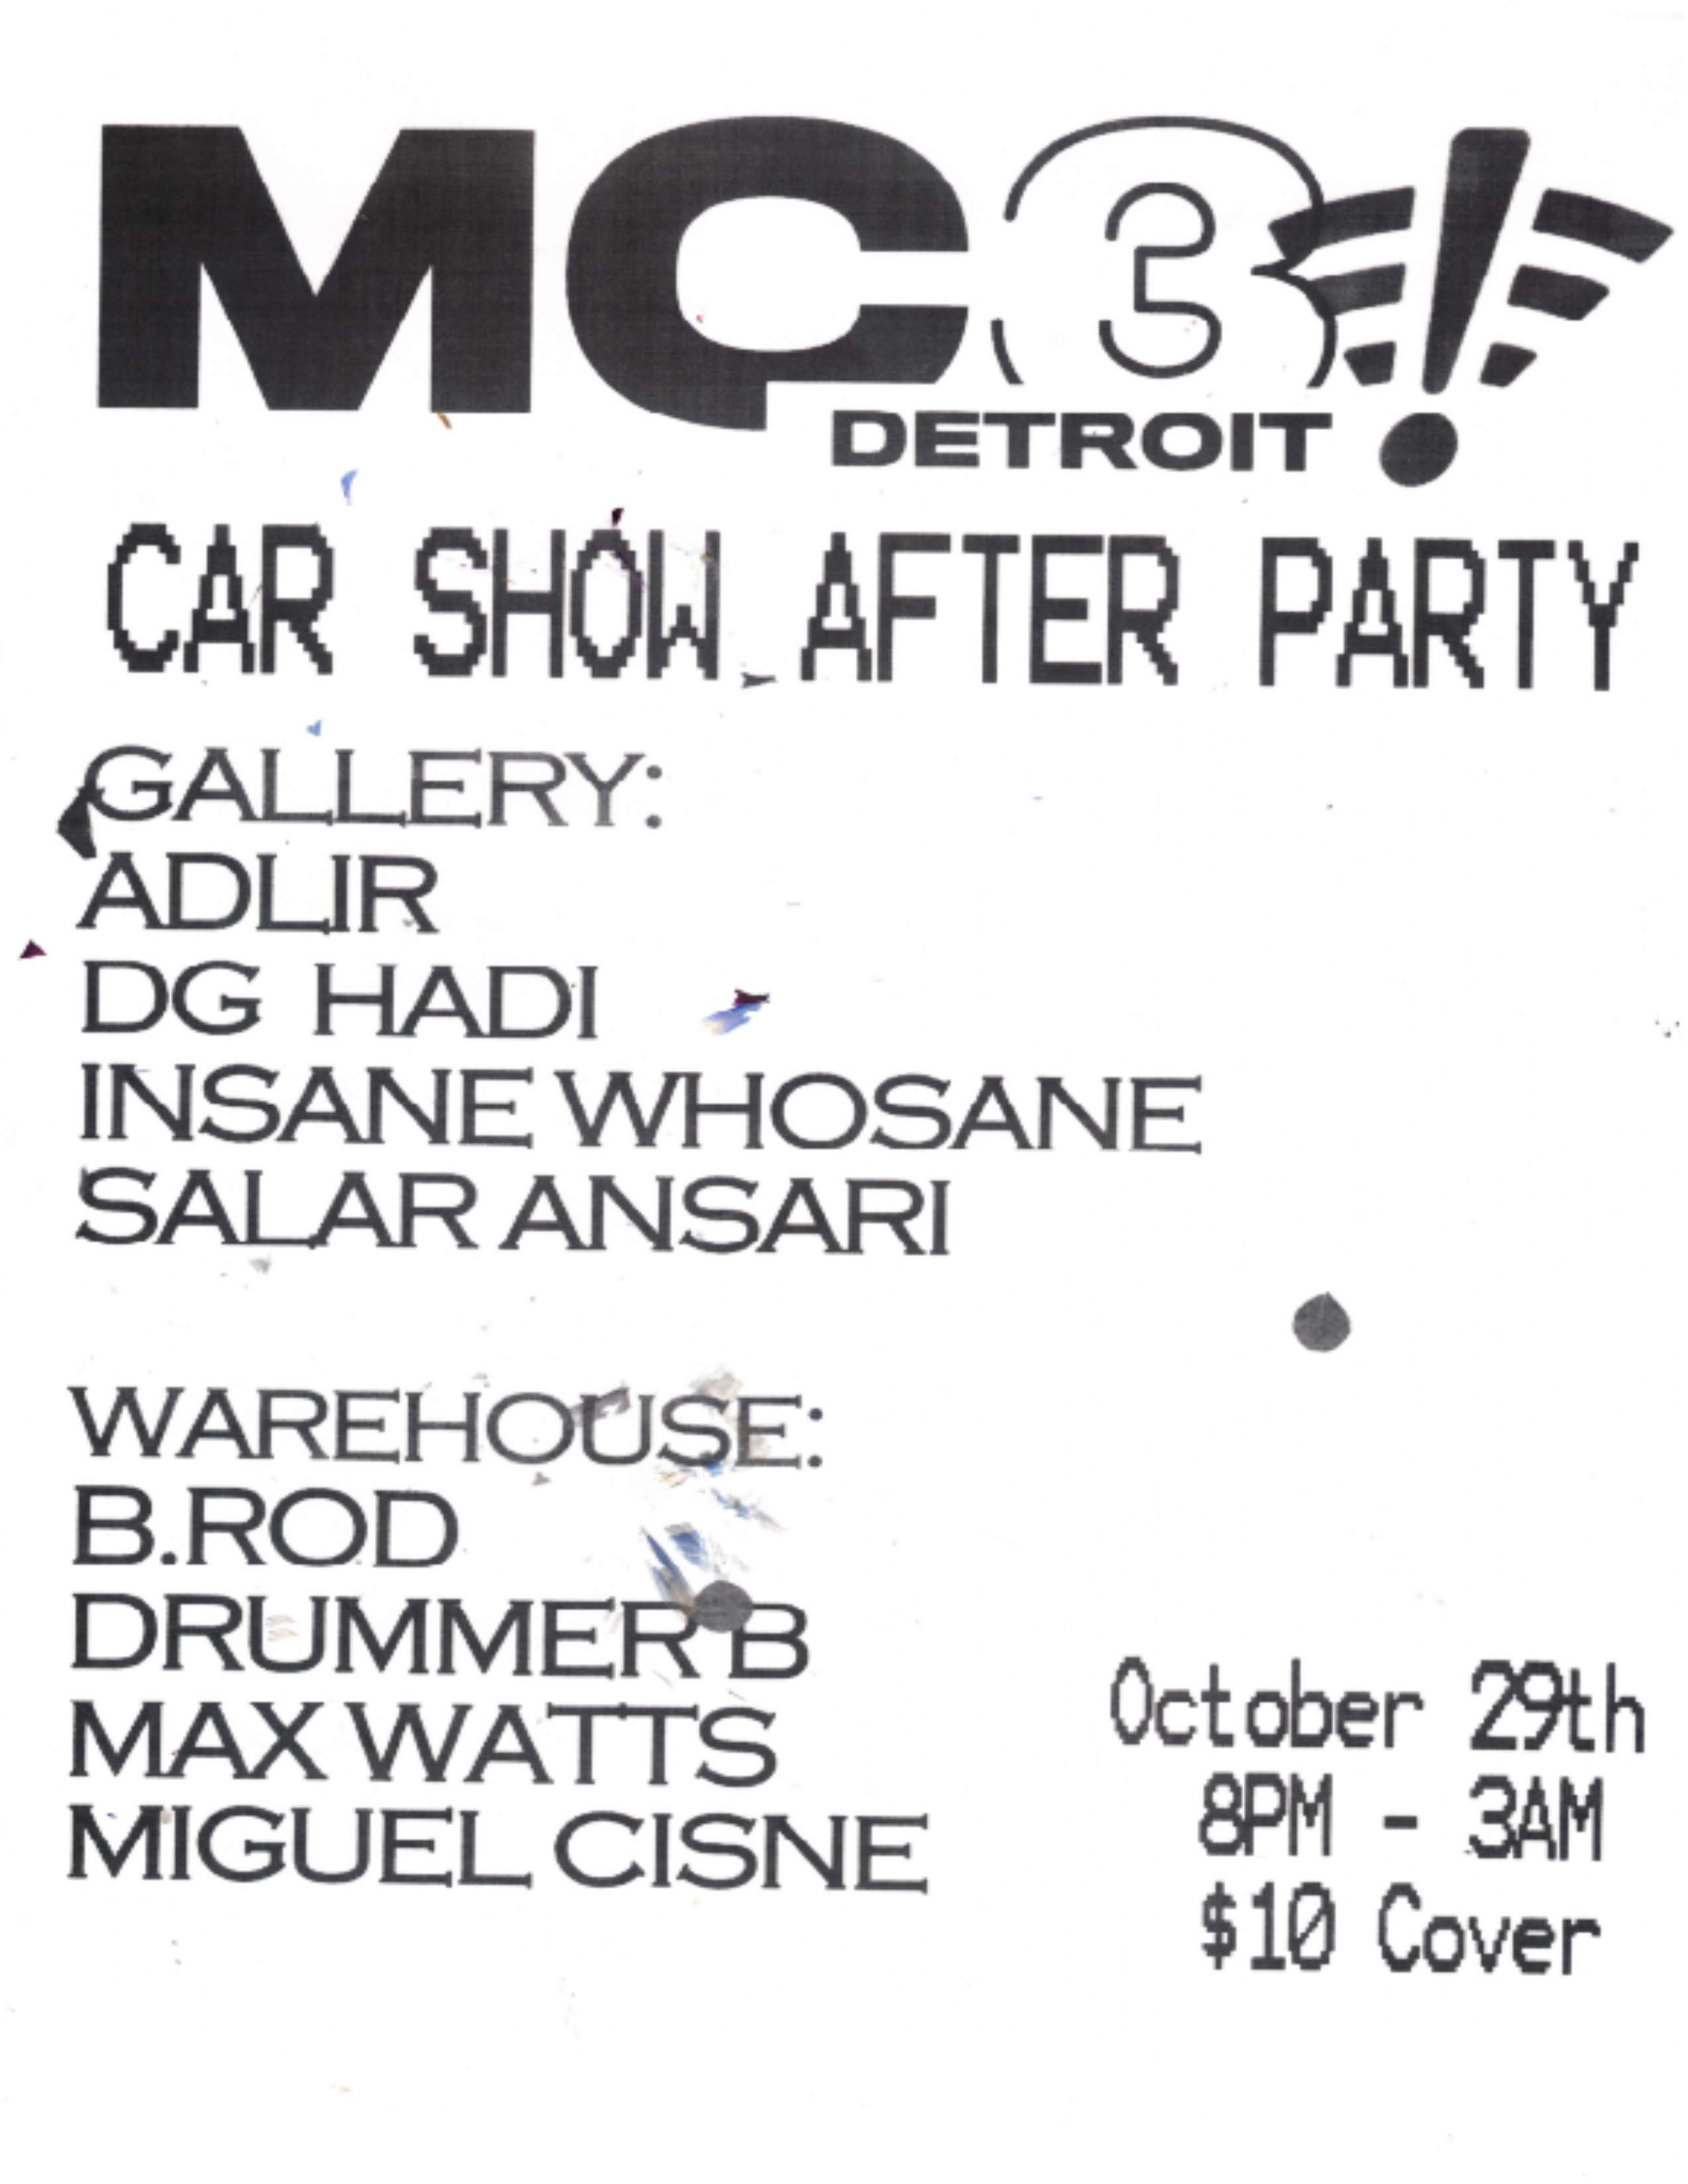 LN X MC3 CARSHOW AFTER PARTY - フライヤー表